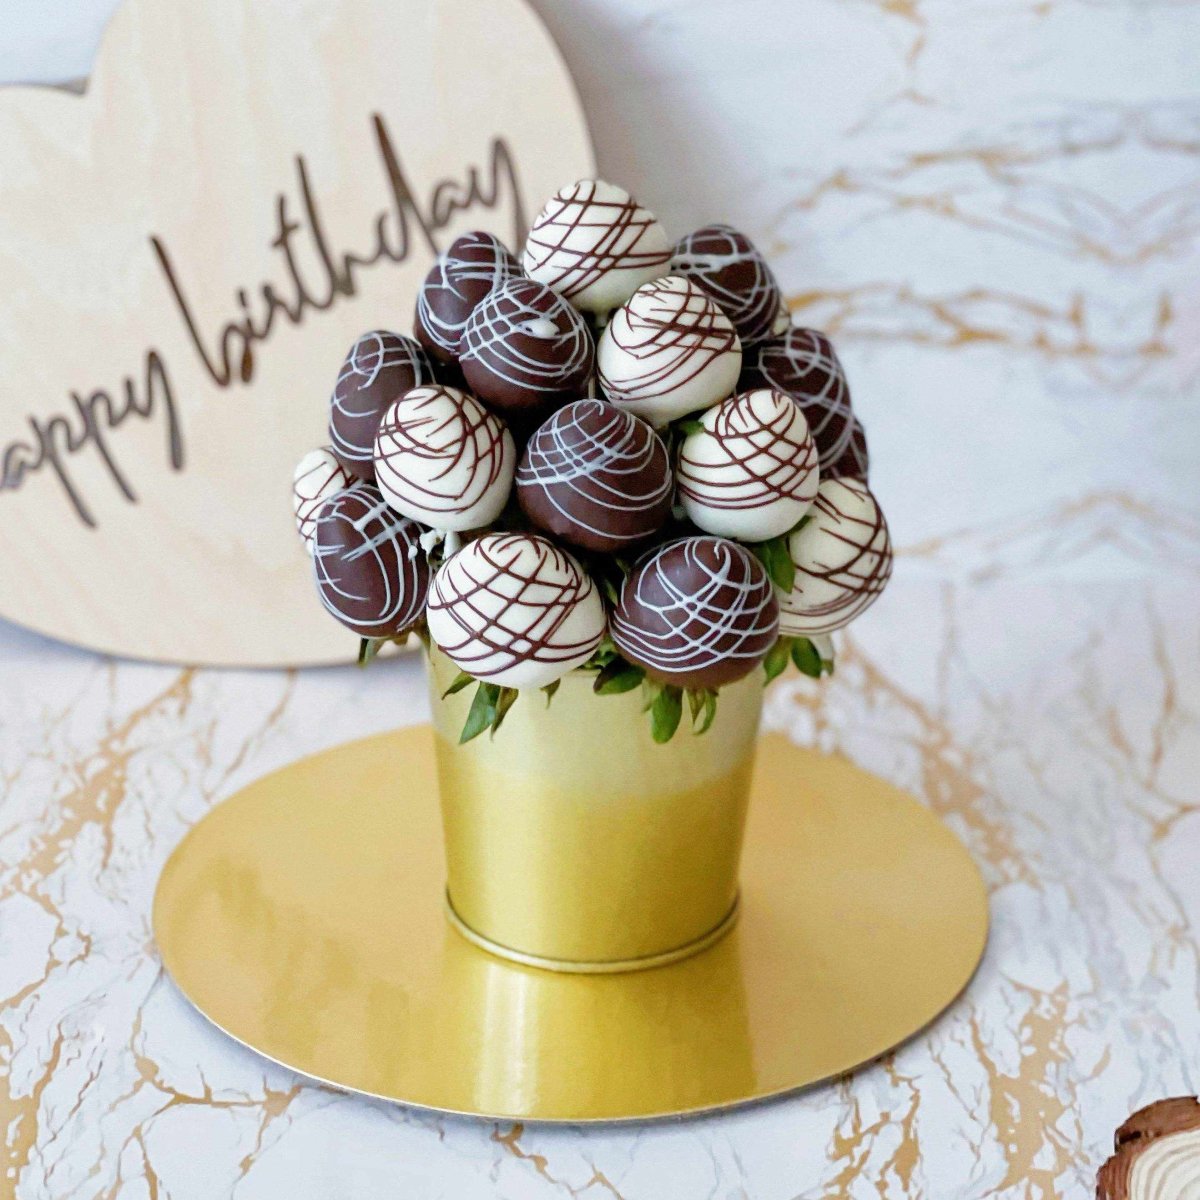 Simple as Black and White Fresh Fruit Arrangement with Chocolate Dipped Strawberries - Rainbowly Fresh Fruit Gift and Flower Arrangments